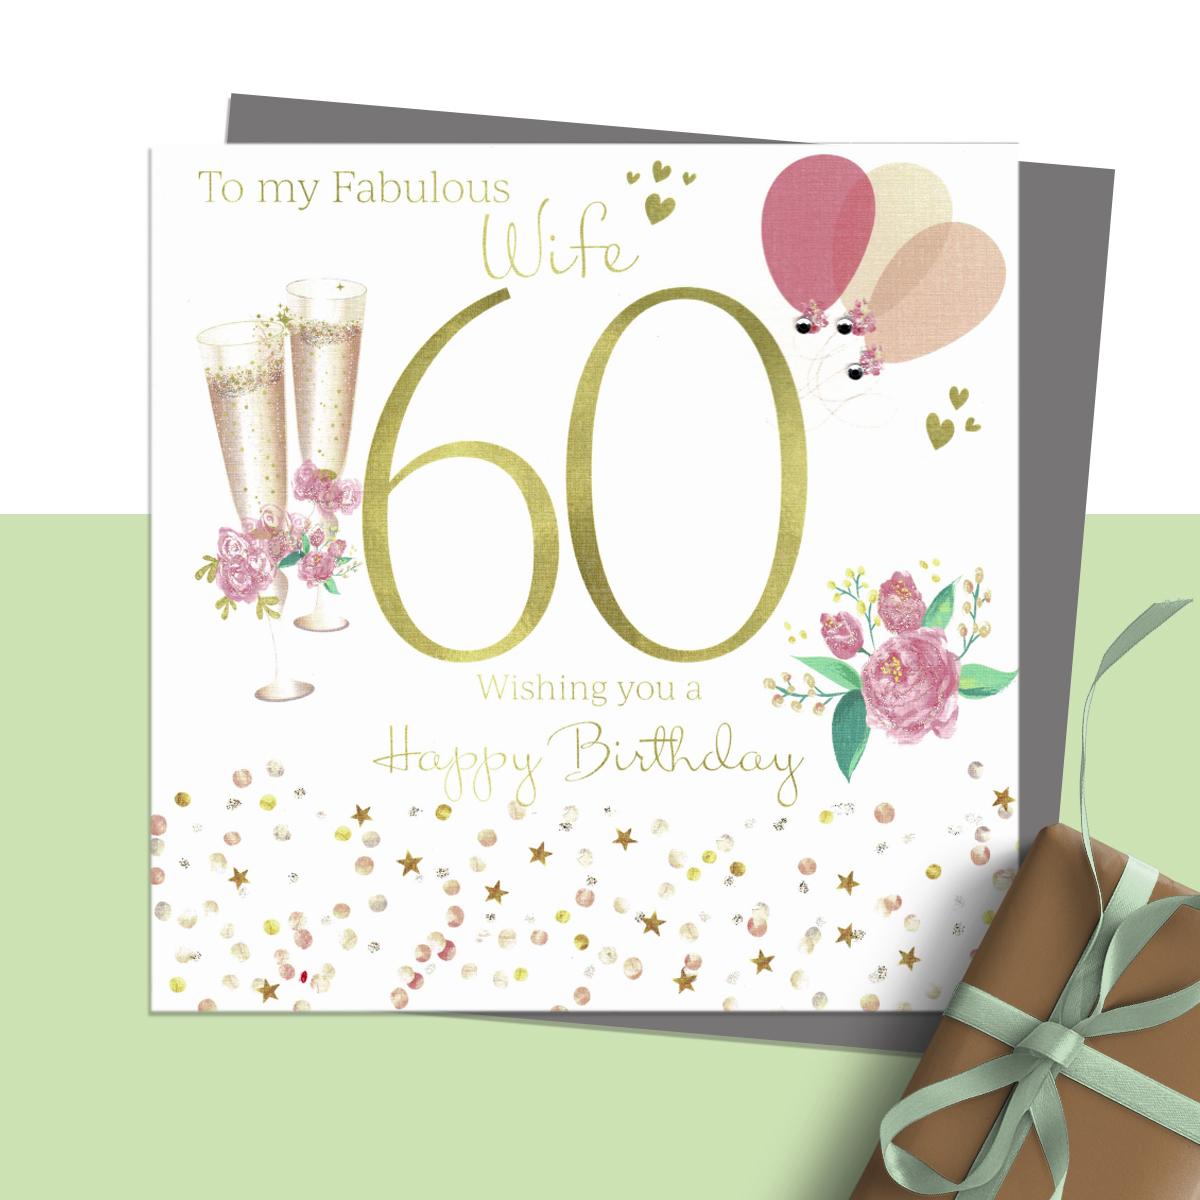 To My Fabulous Wife 60 Wishing You A Happy Birthday' Featuring Champagne Flutes, Flowers And Balloons. Hand Finished With Sparkle And Jewel Embellishments. Blank Inside For Own Message. Complete With Silver Coloured Envelope